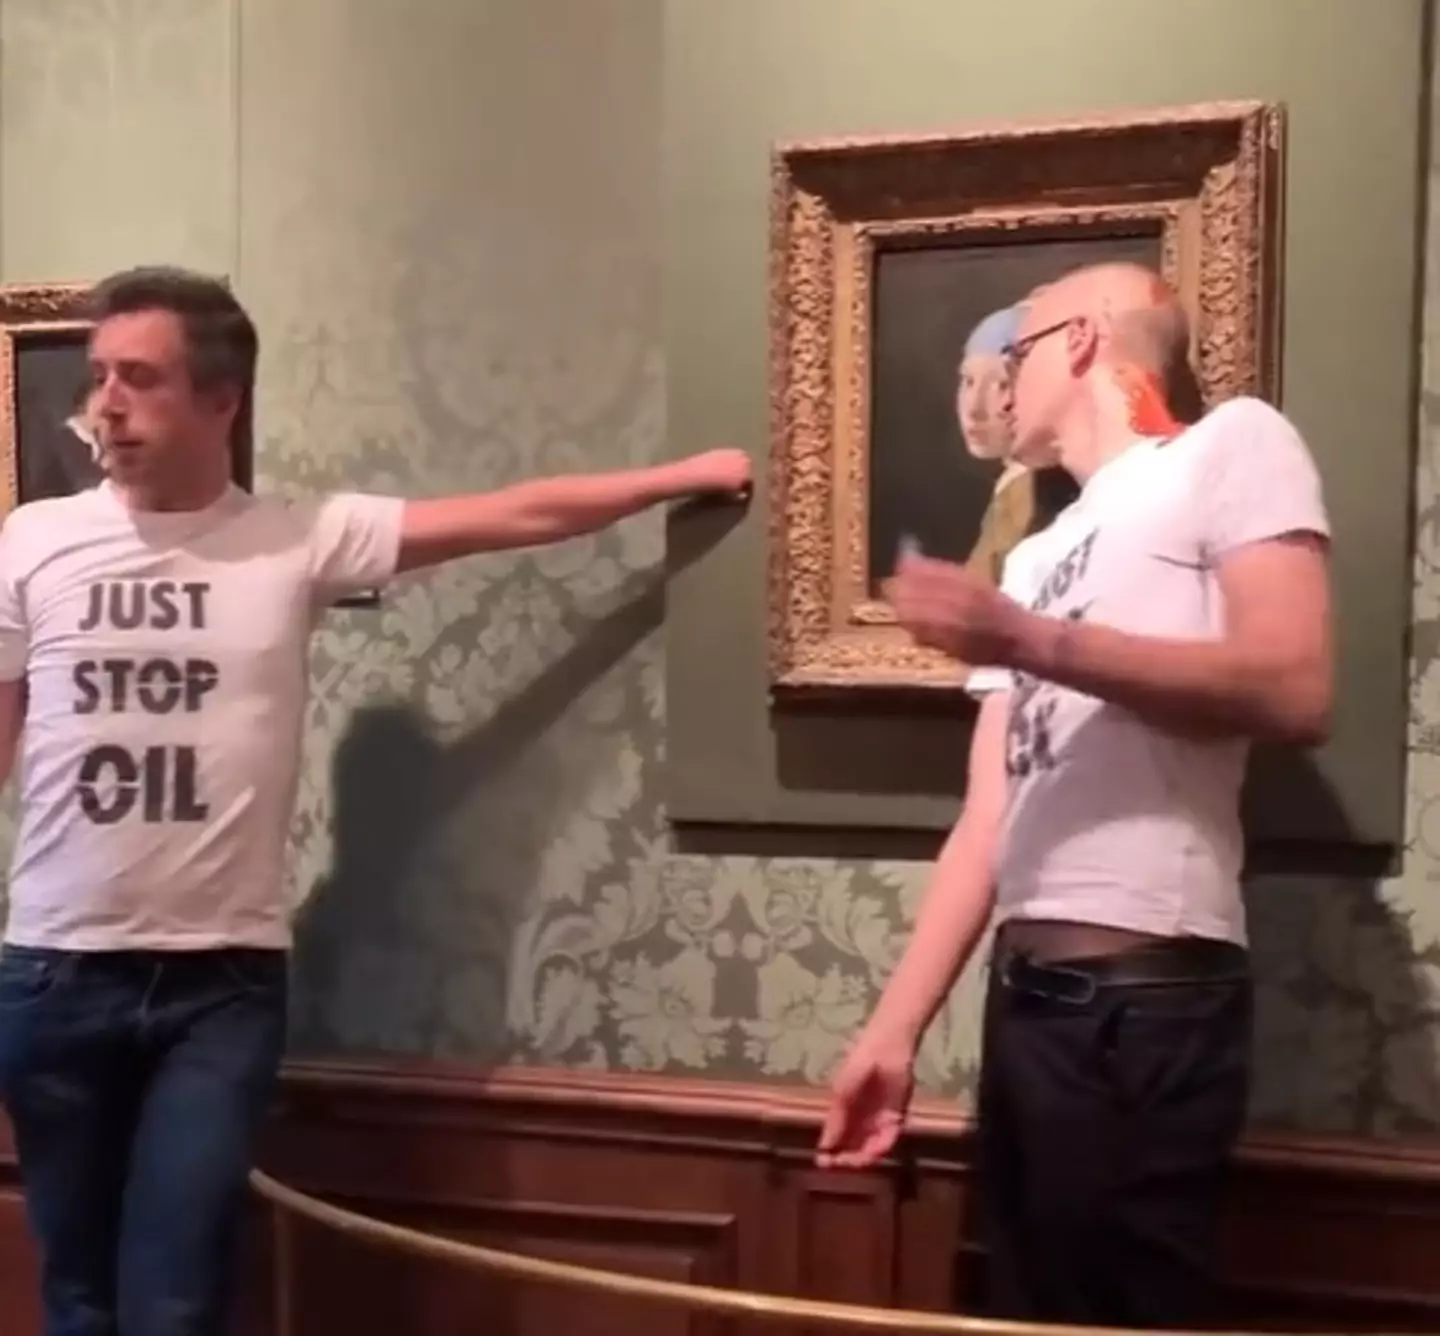 Protesters doused themselves in soup and then glued themselves to the famous painting.